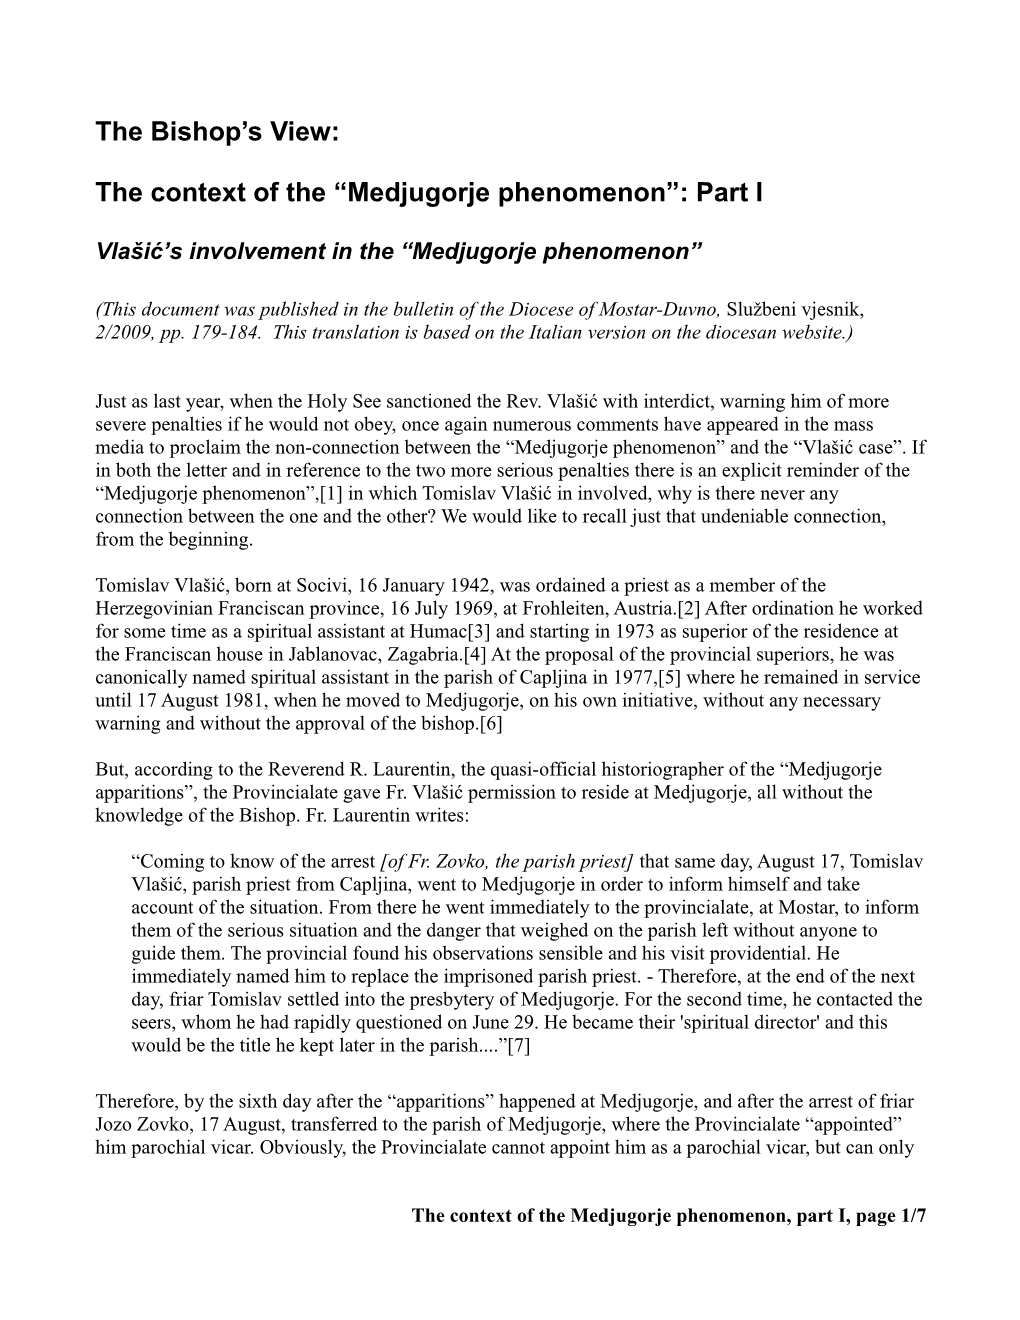 The Bishop's View: the Context of the “Medjugorje Phenomenon